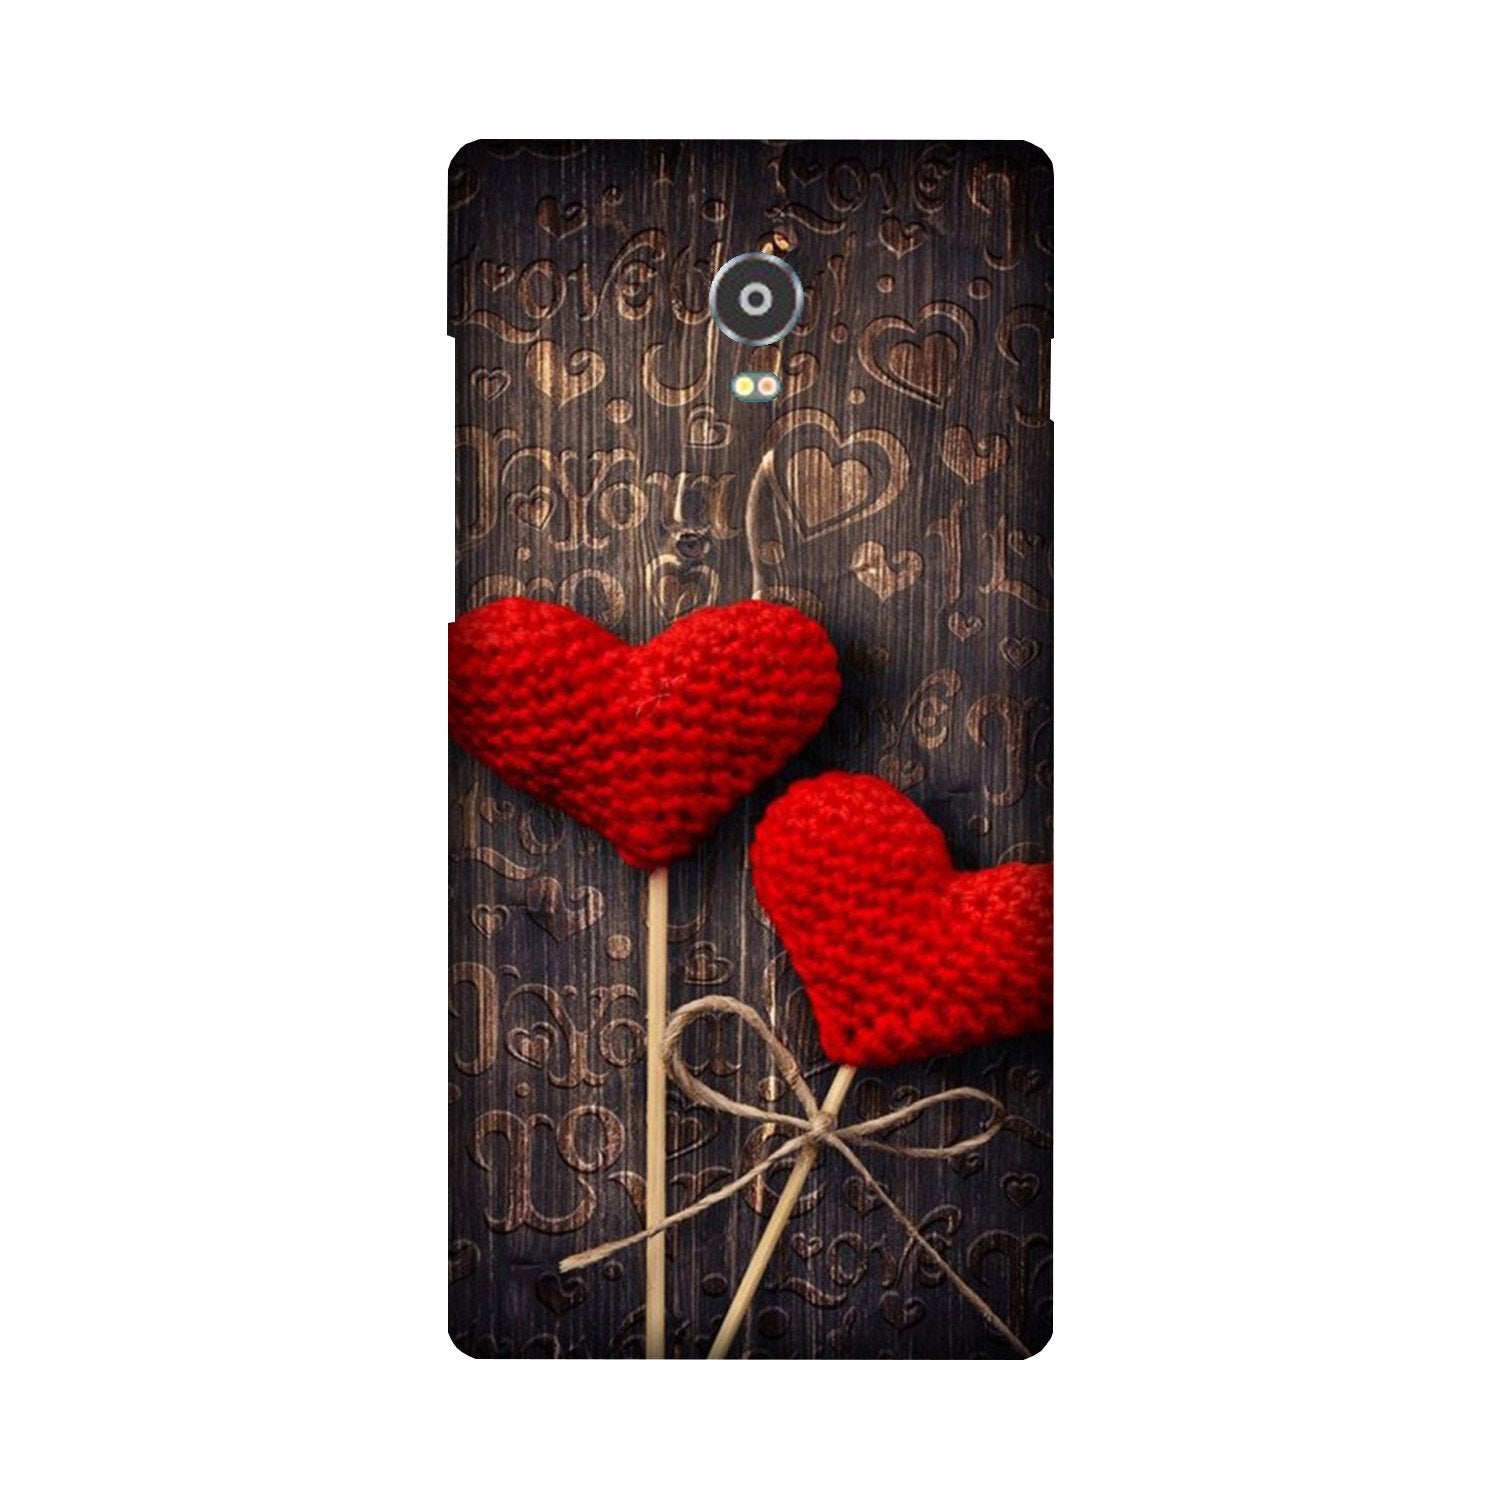 Red Hearts Case for Lenovo Vibe P1